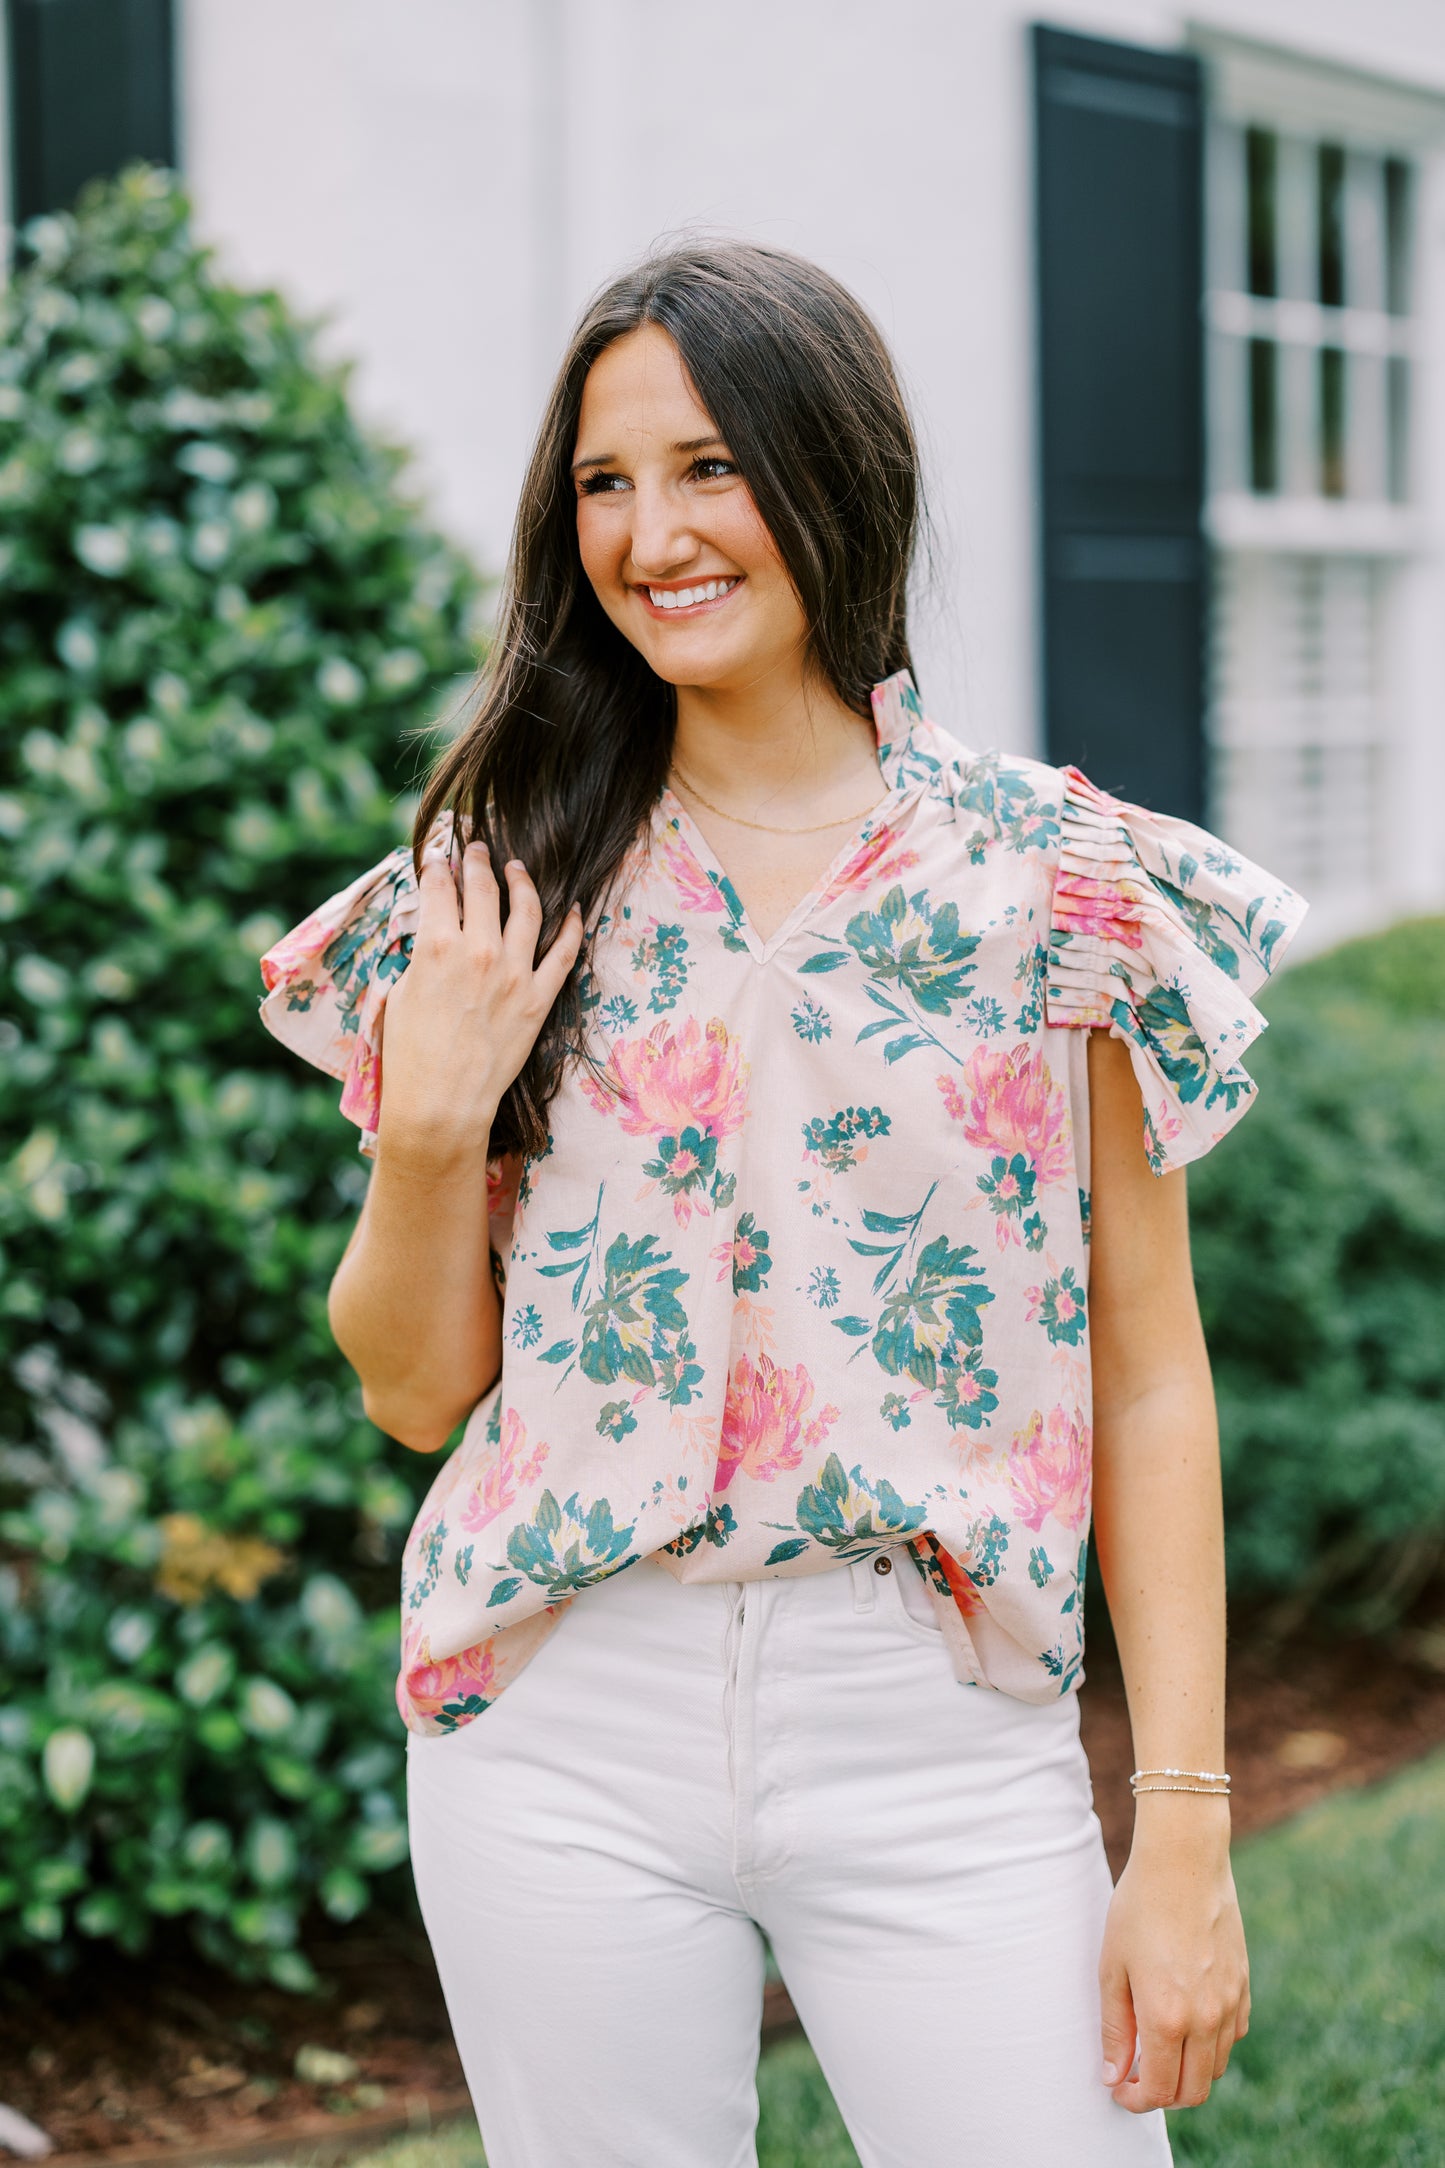 The Becca Floral Top